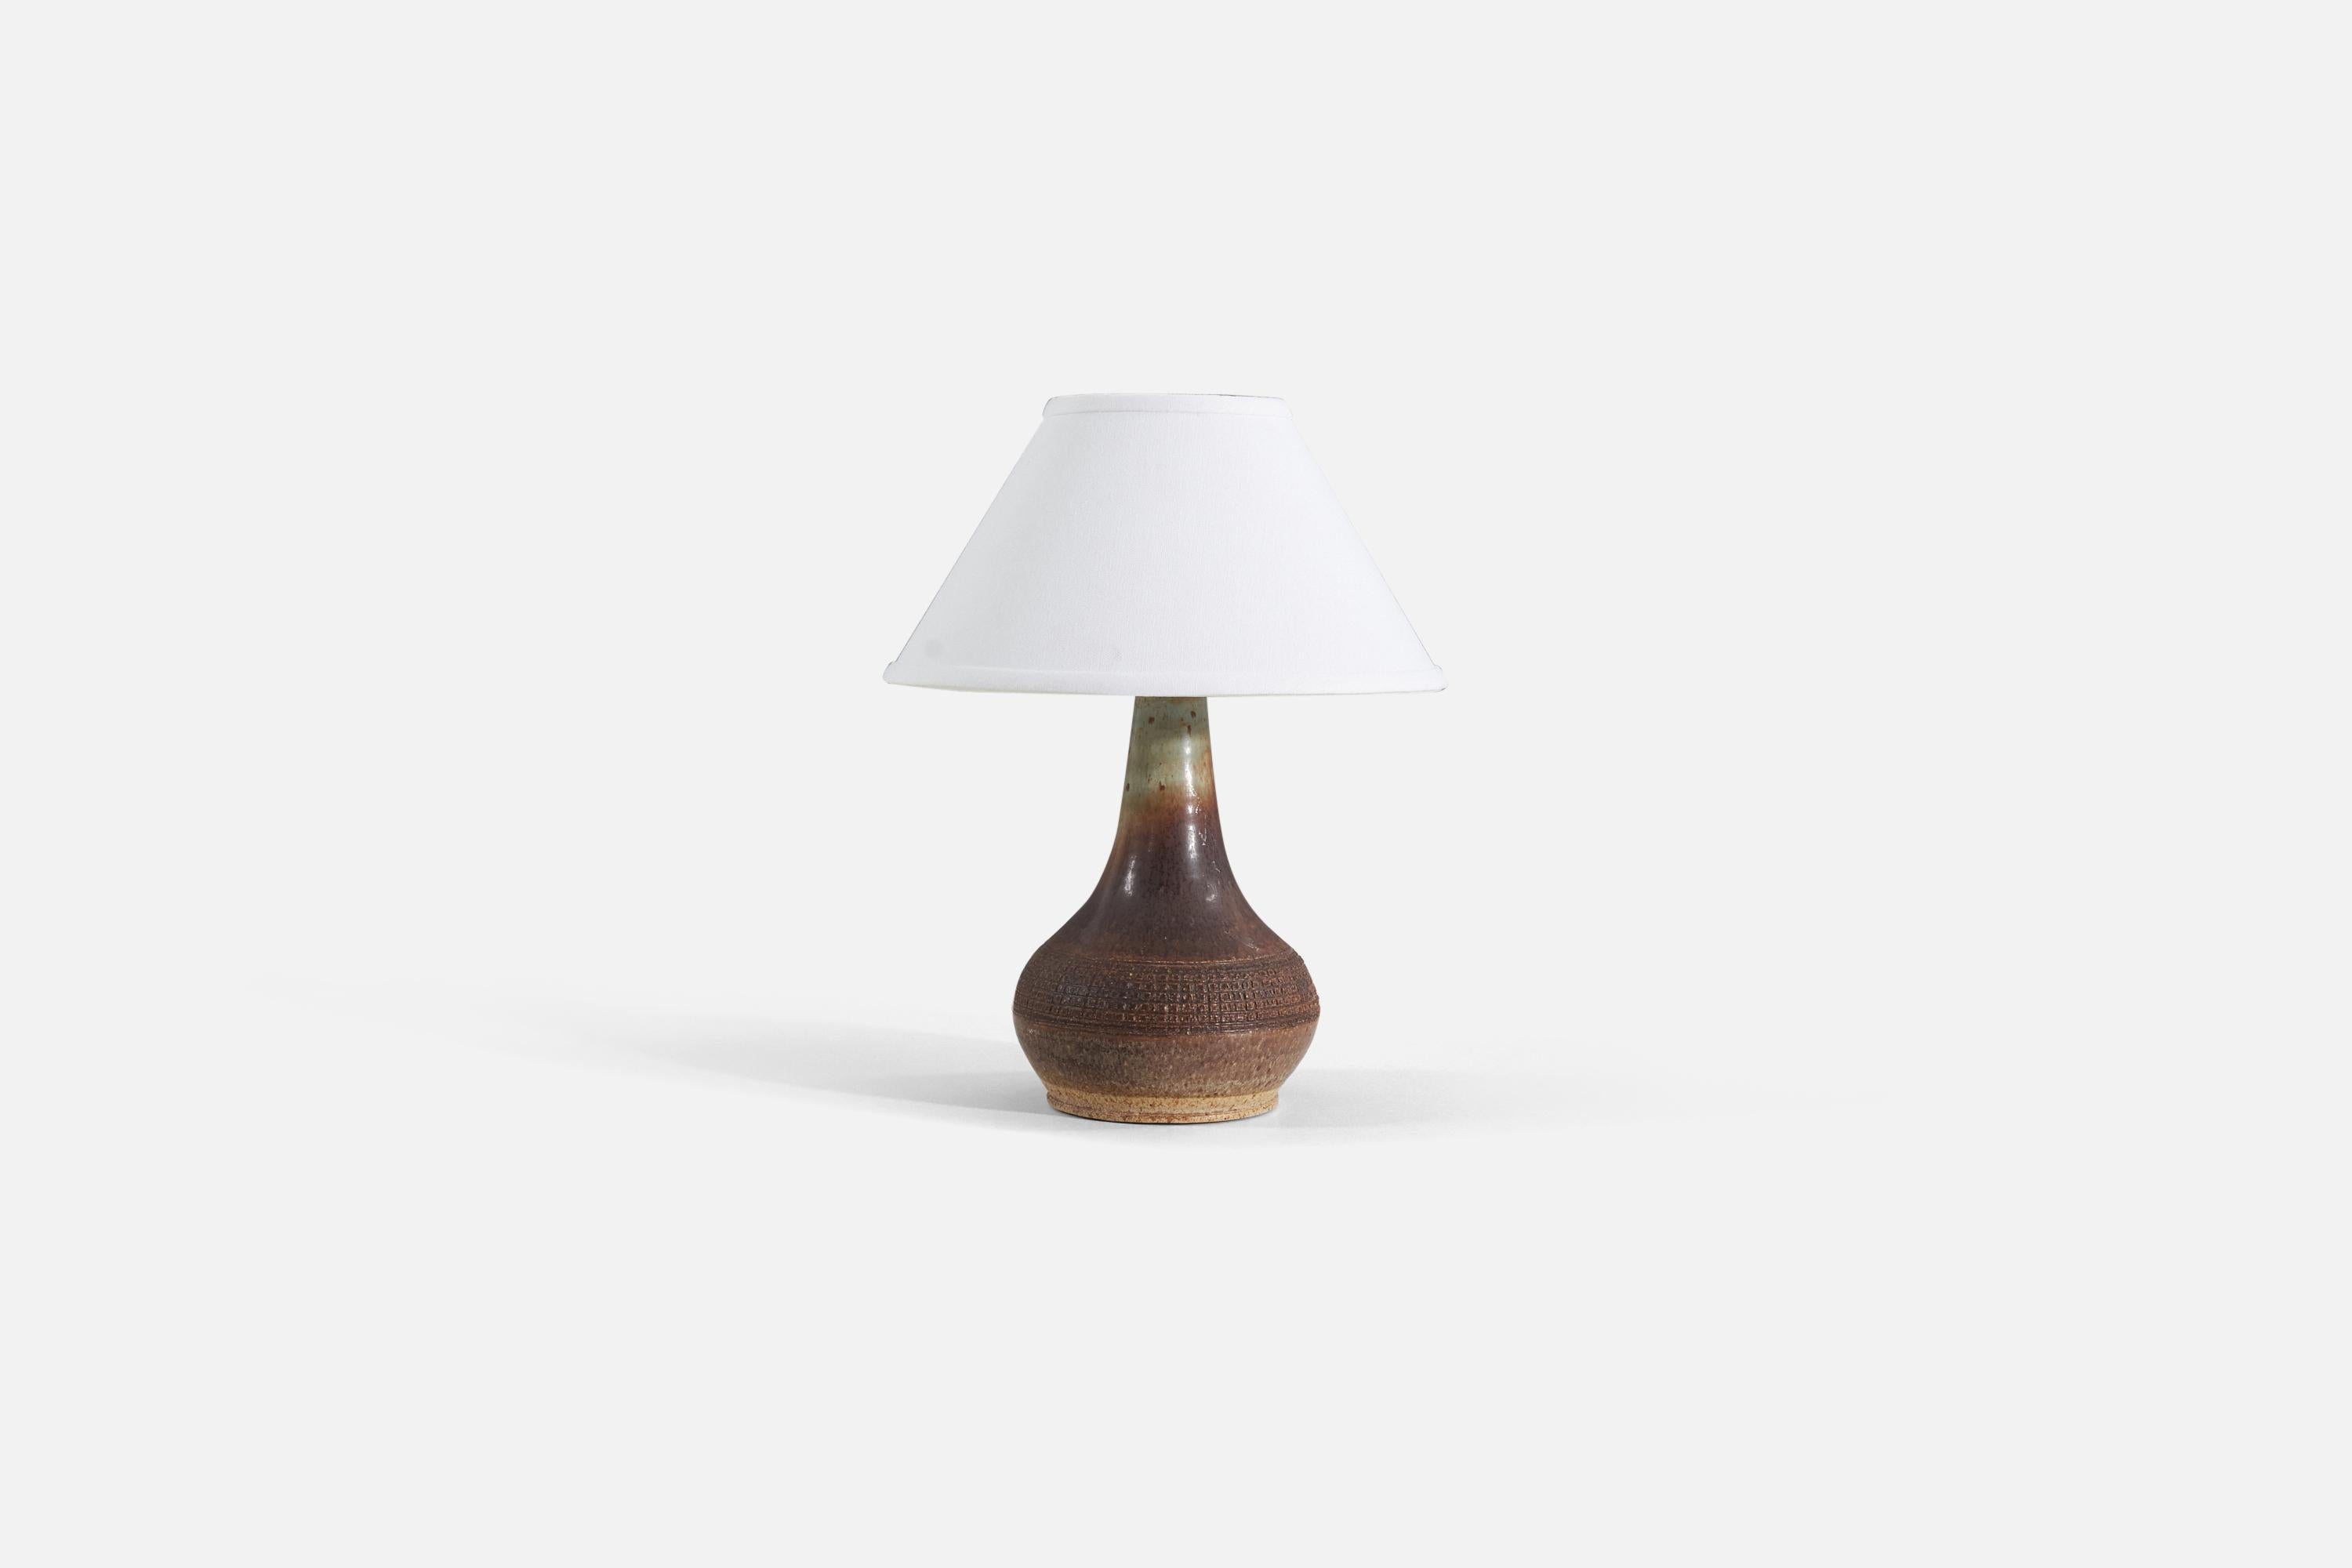 A brown and green glazed stoneware table lamp produced by Marco Stentøj, Denmark, 1960s.

Sold without lampshade. 

Measurements listed are of lamp. 
Shade : 4.5 x 10.25 x 6
Lamp with shade : 13.25 x 10.25 x 10.25.